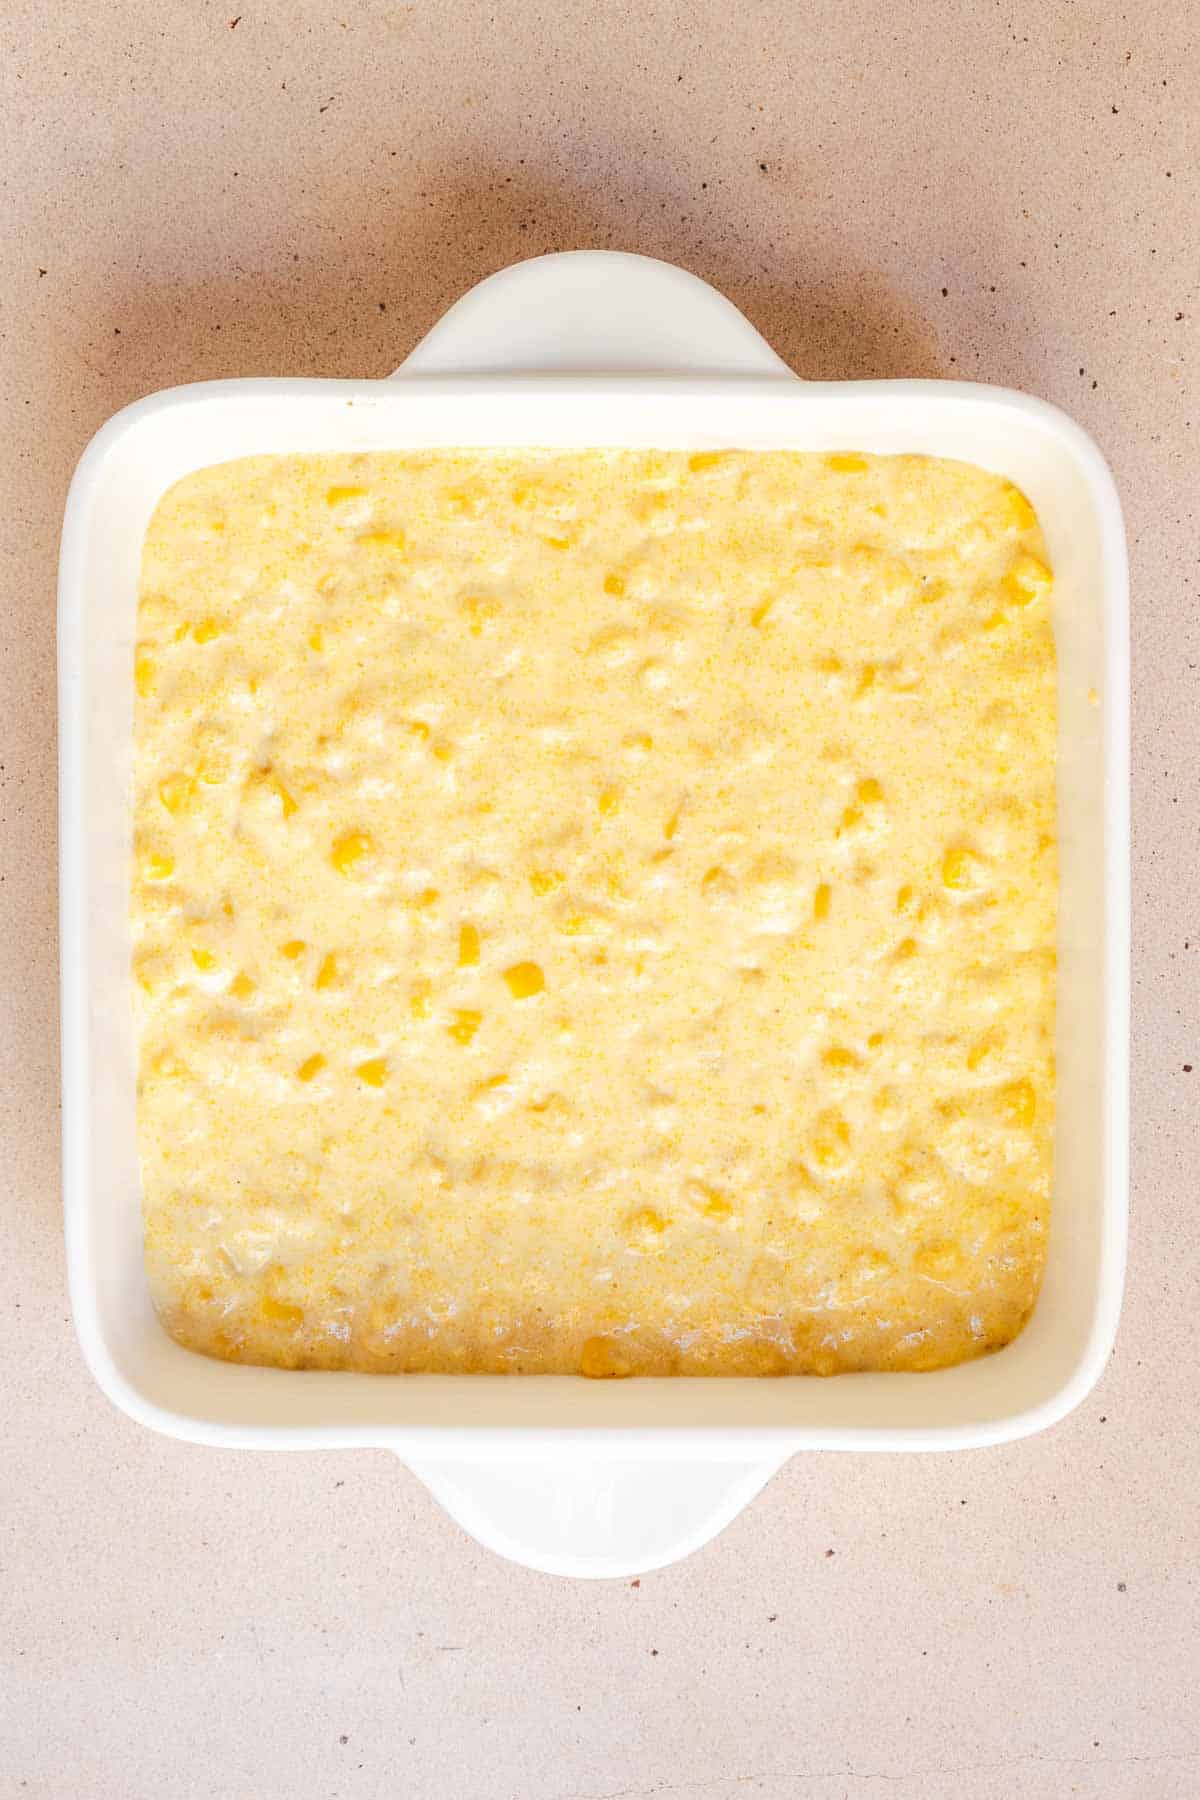 The cornbread mixture is spread evenly in the bottom on an 8 by 8 inch baking dish.